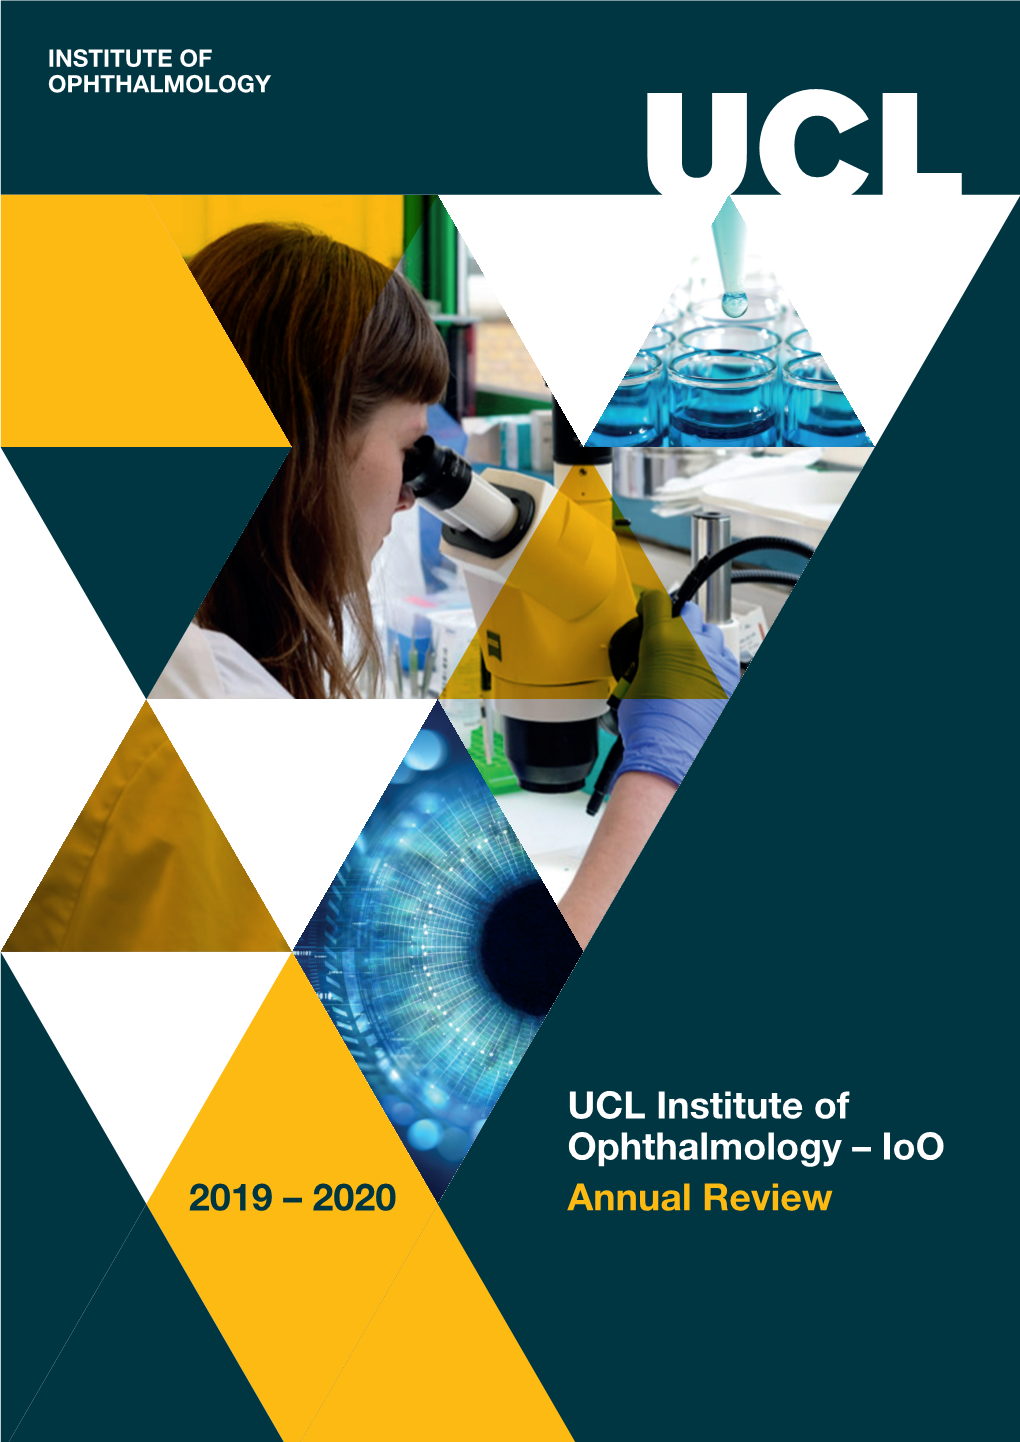 UCL Institute of Ophthalmology – Ioo Annual Review 2019 – 2020